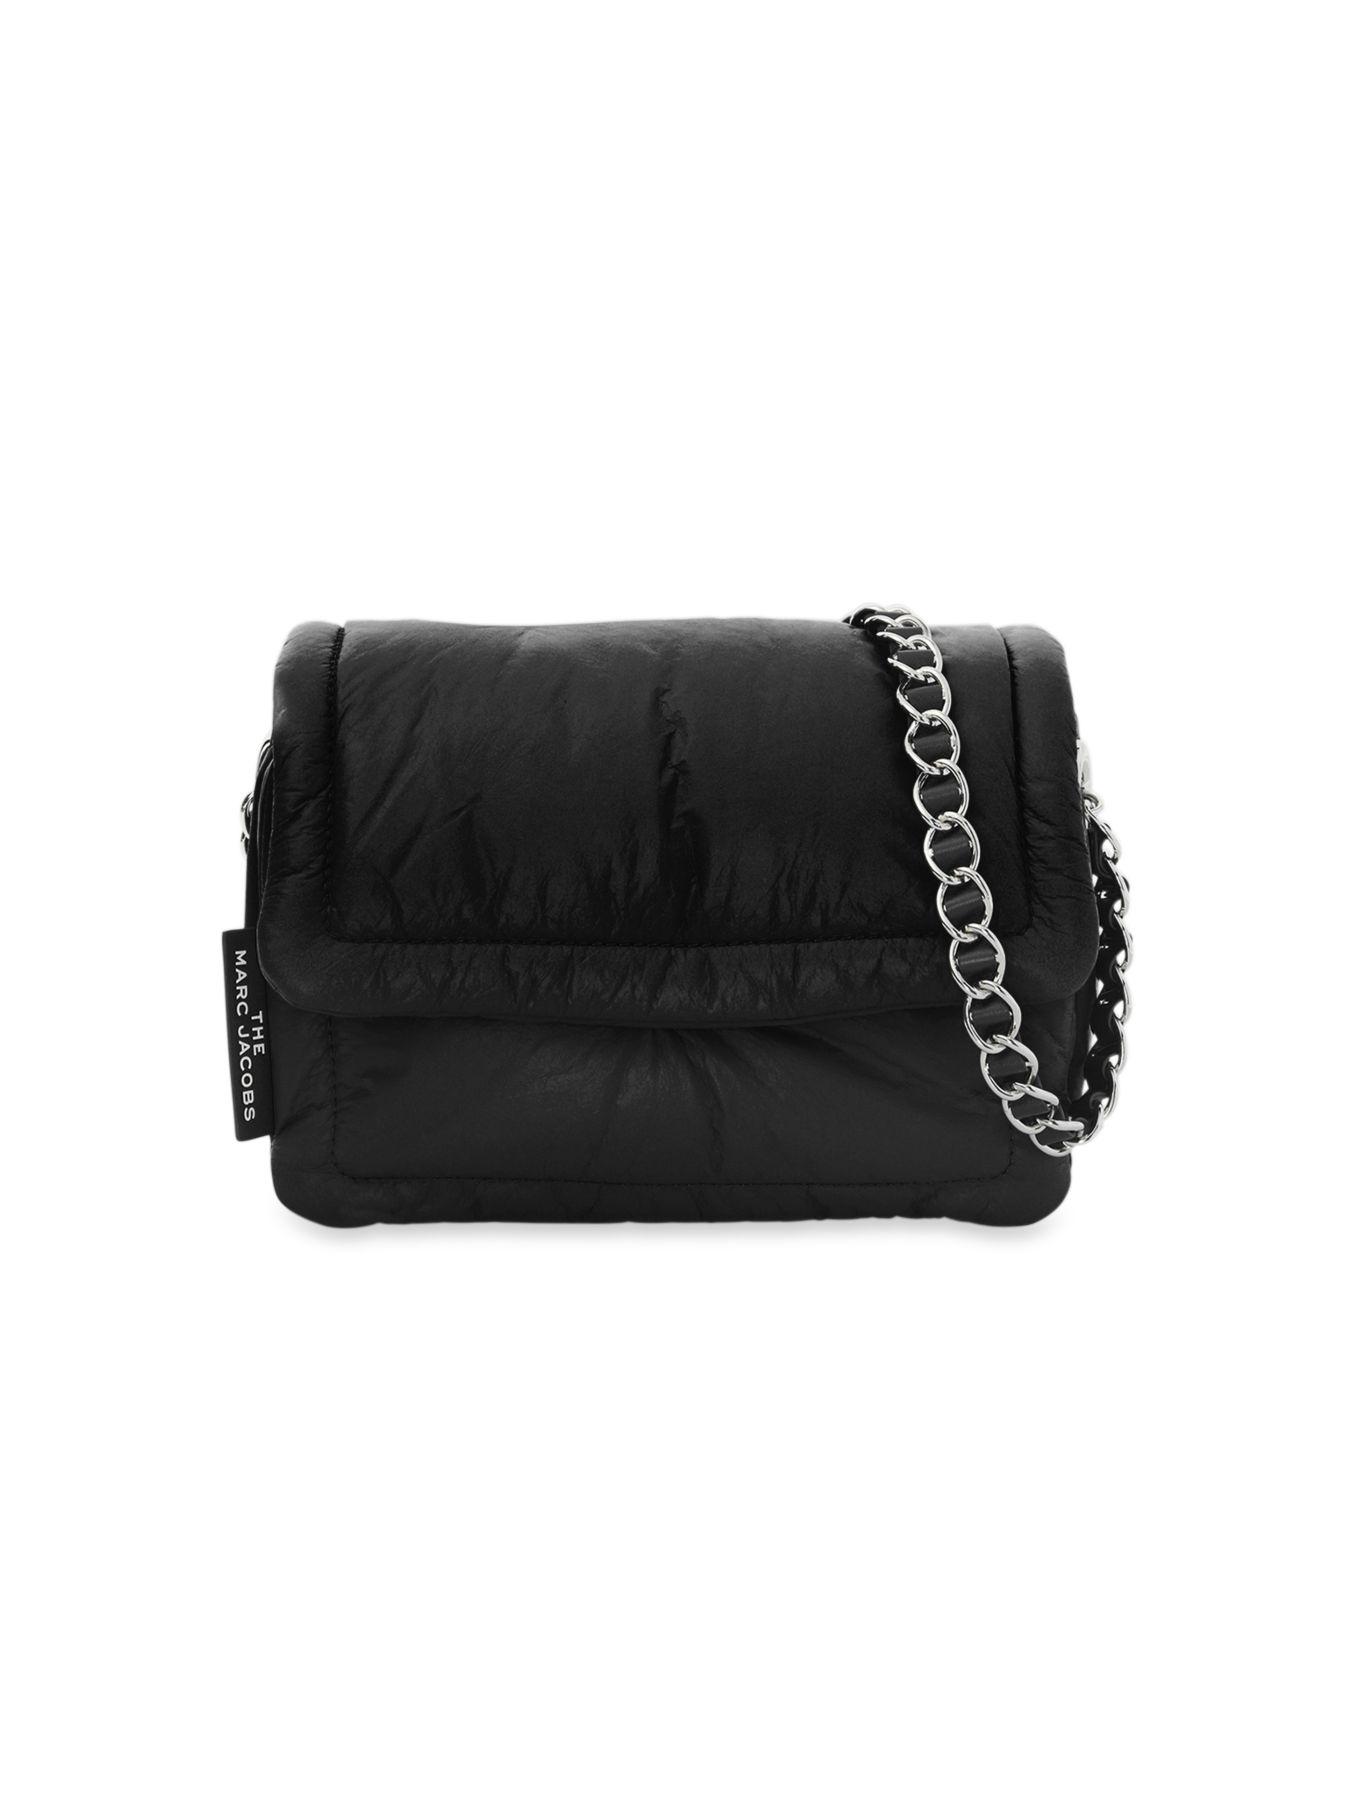 Marc Jacobs The Pillow Leather Crossbody Bag in Black - Lyst